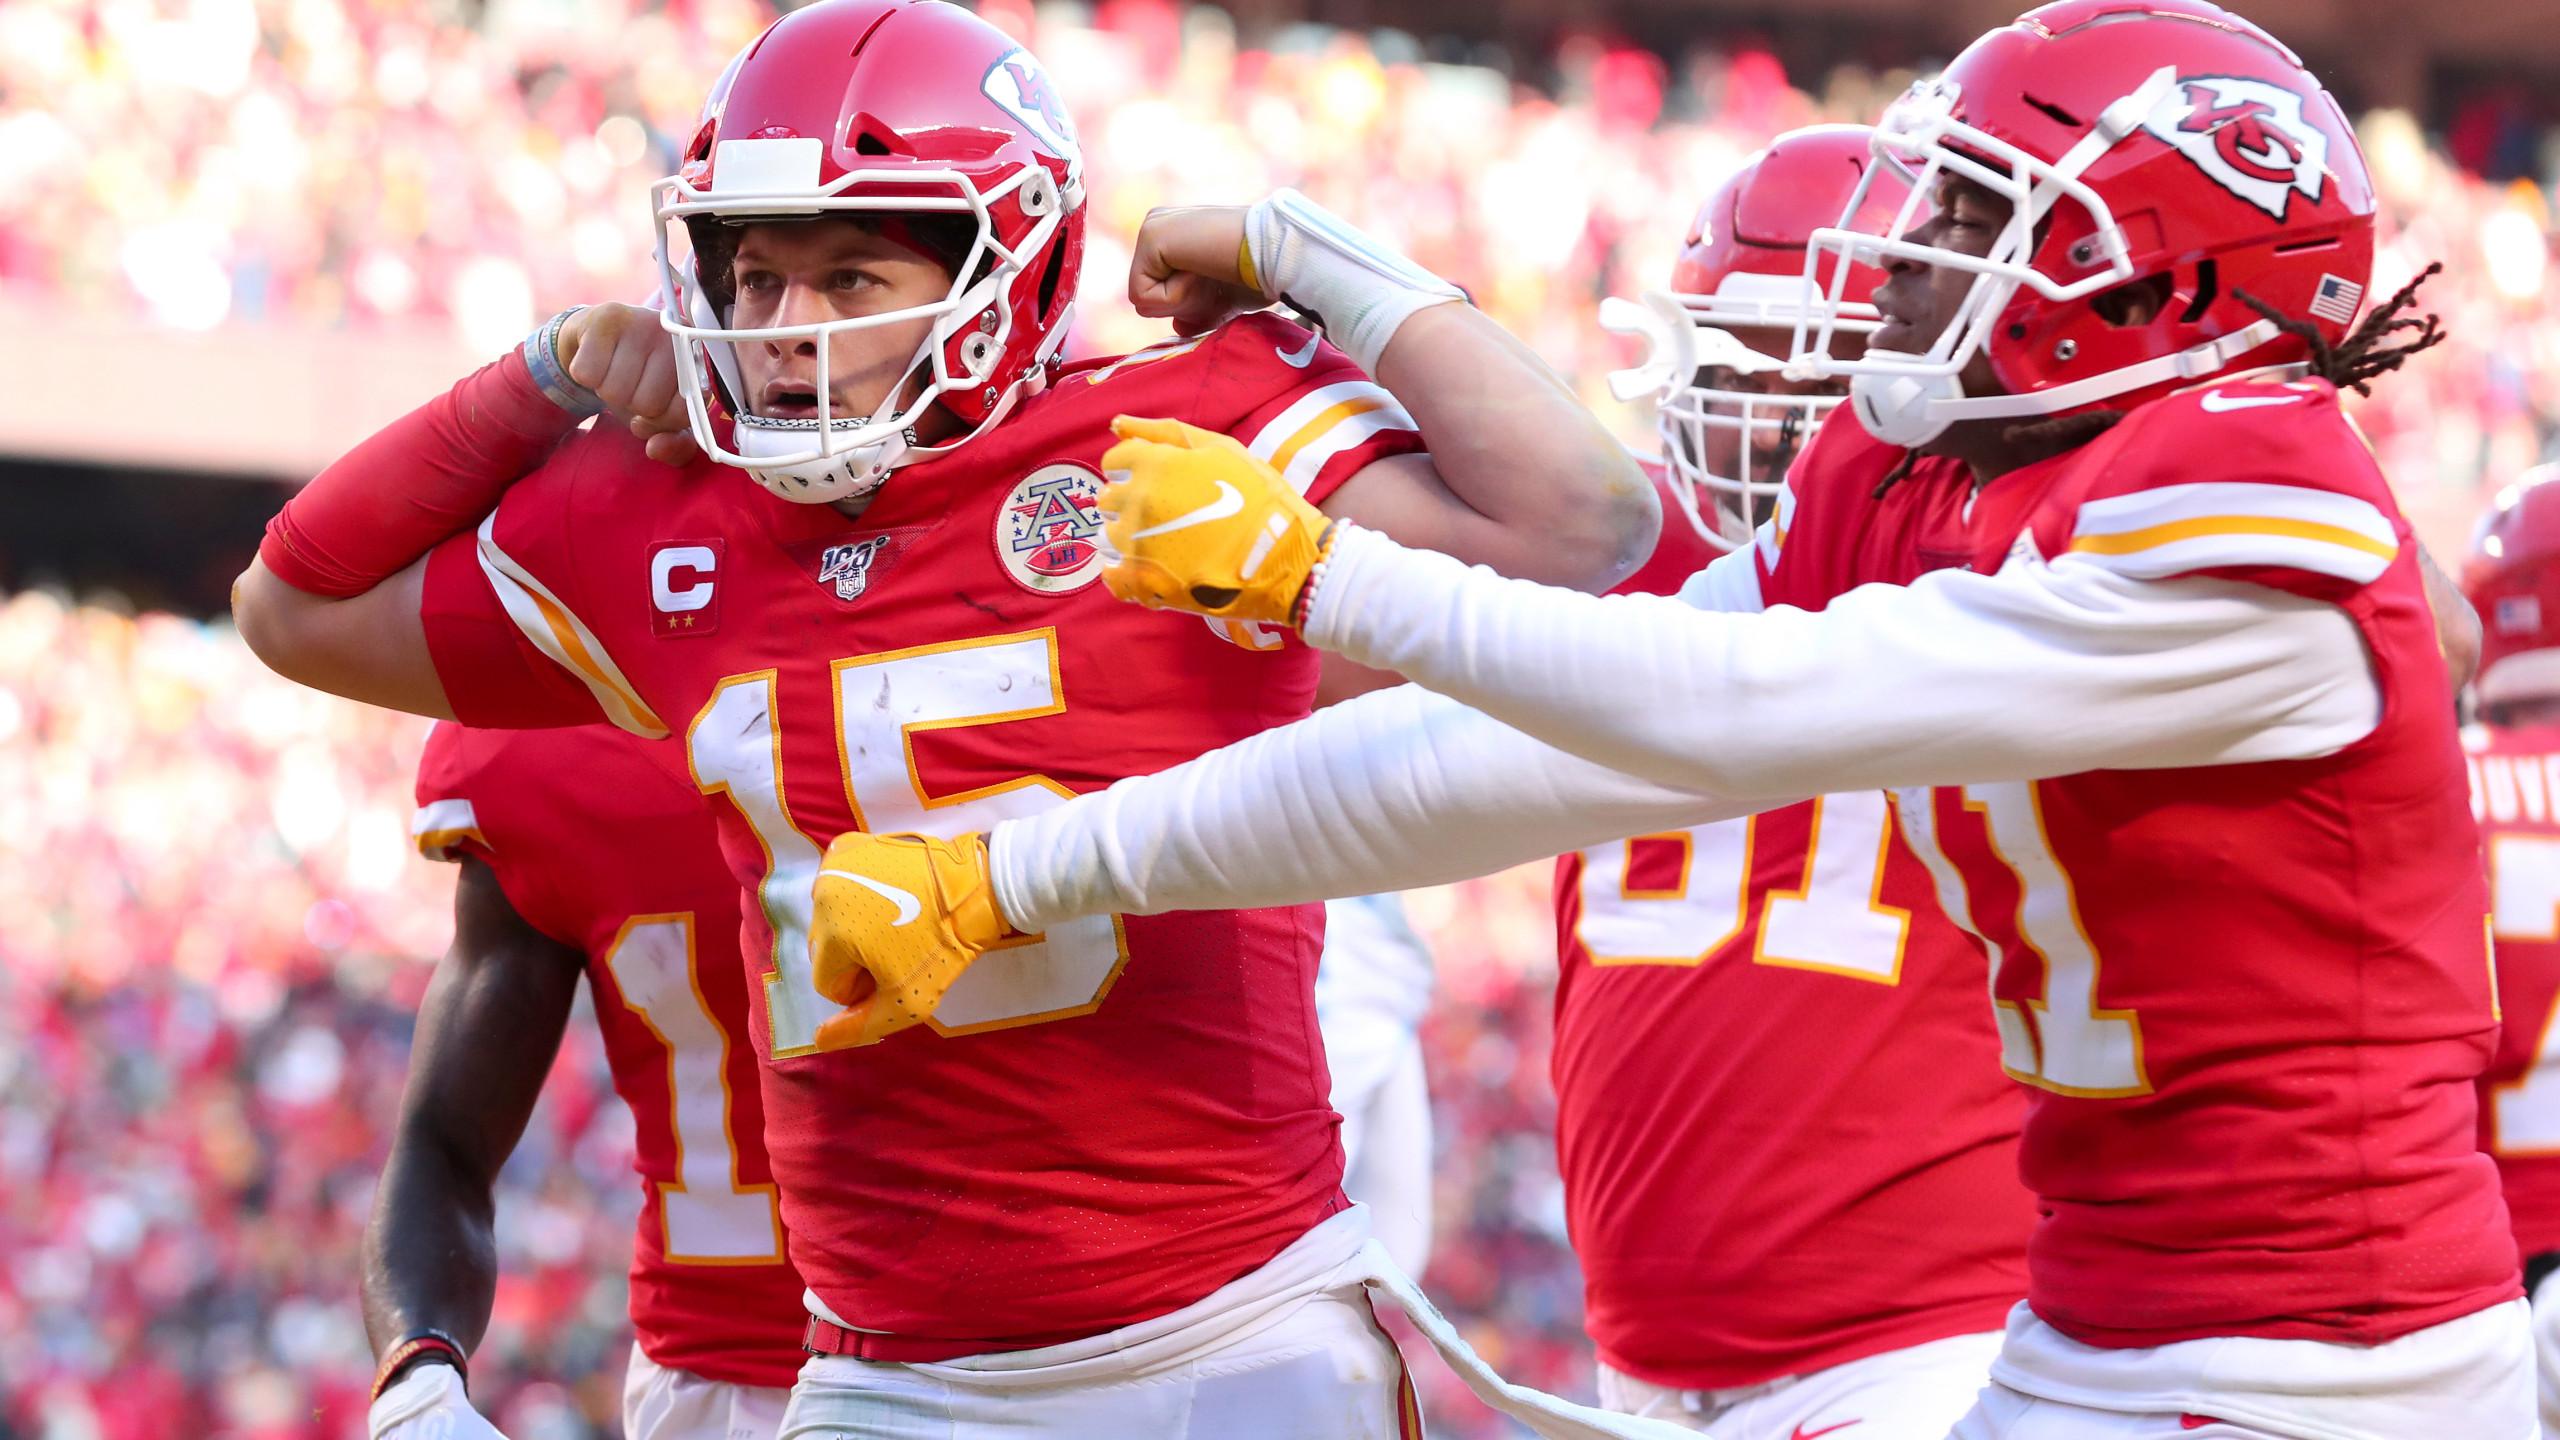 Whitehouse native Patrick Mahomes leads Chiefs to the Super